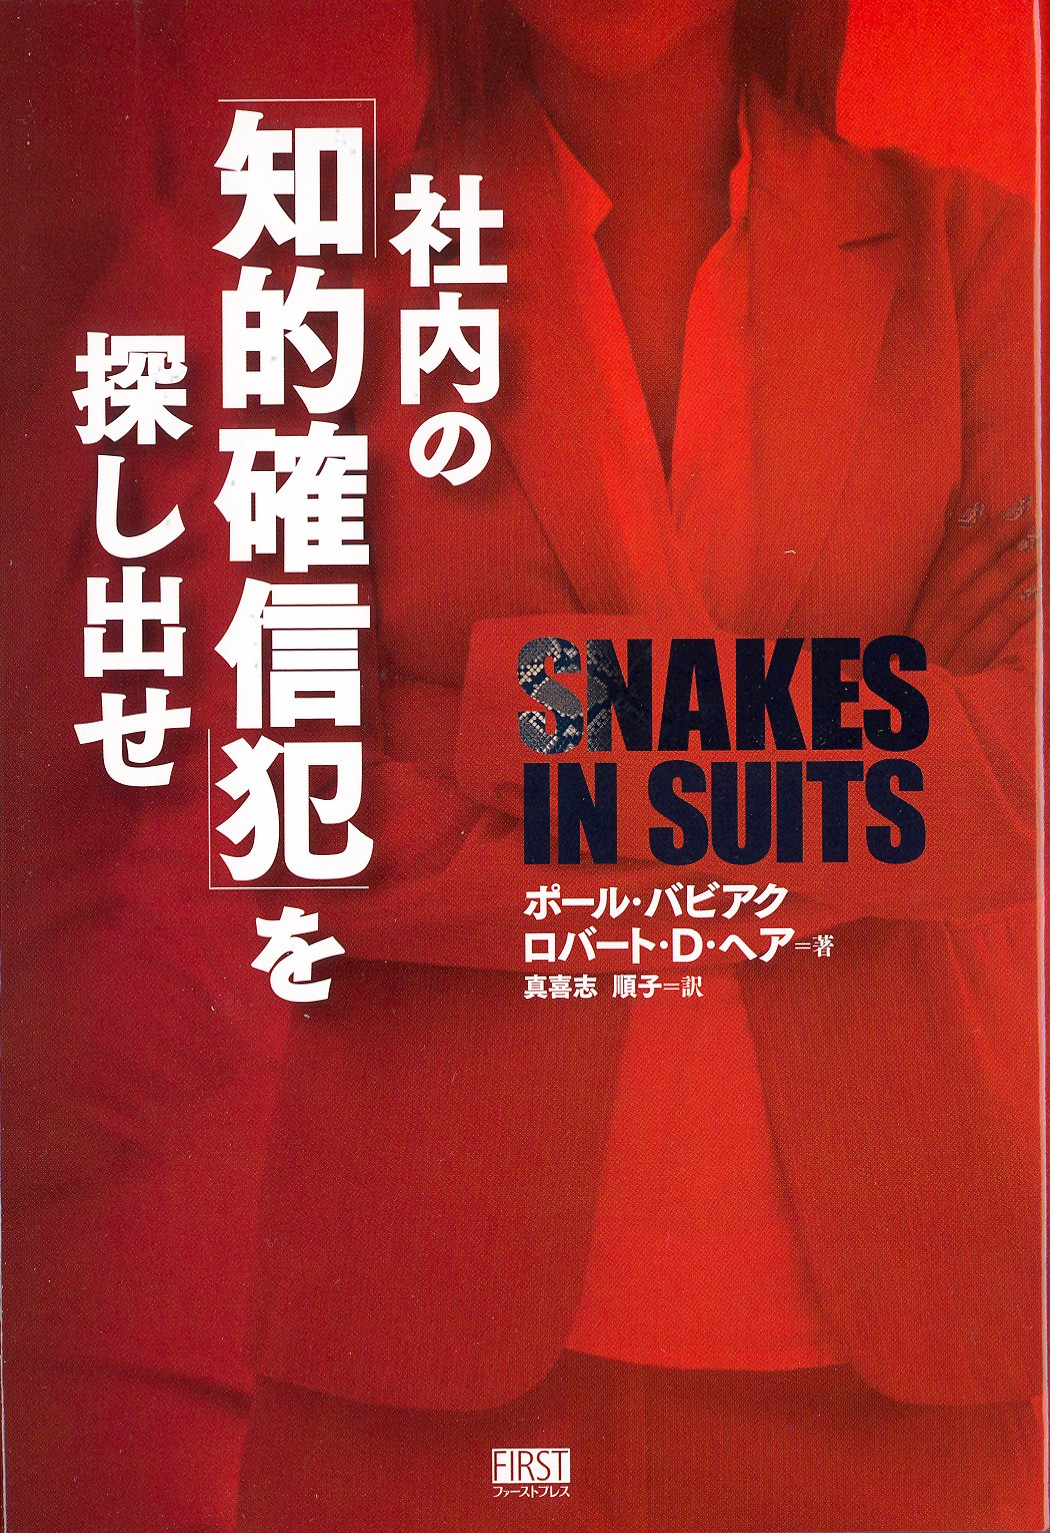 Japanese Snakes in Suits